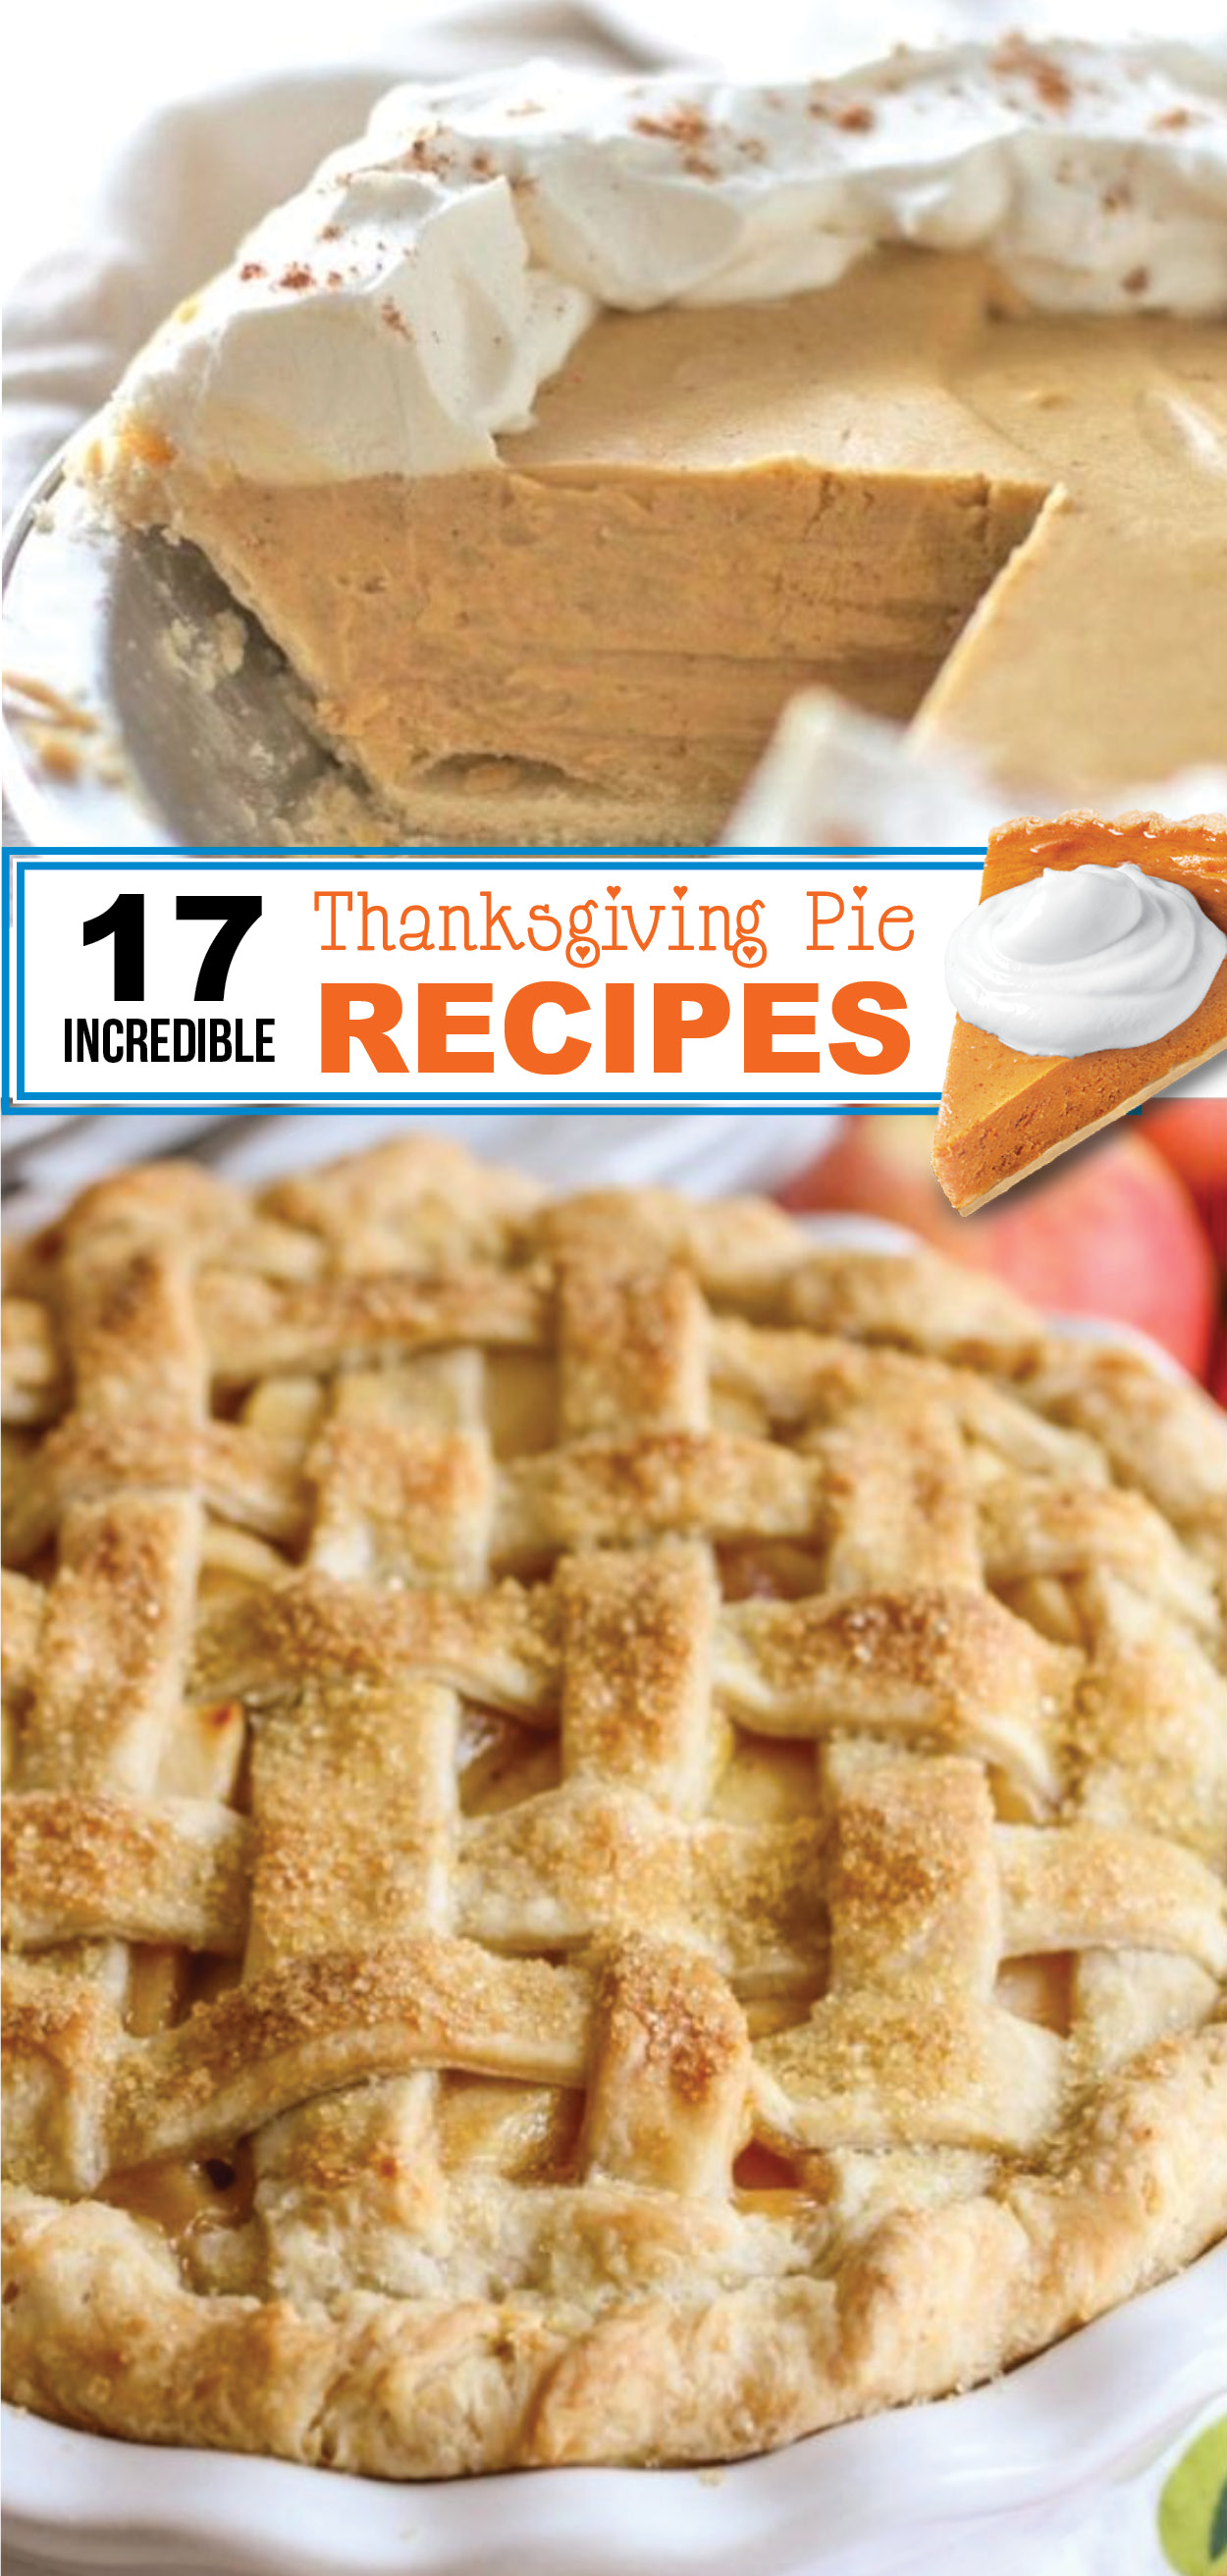 After you’ve enjoyed the Thanksgiving turkey with all the trimmings, nothing compares to these incredible Thanksgiving Pie Recipes